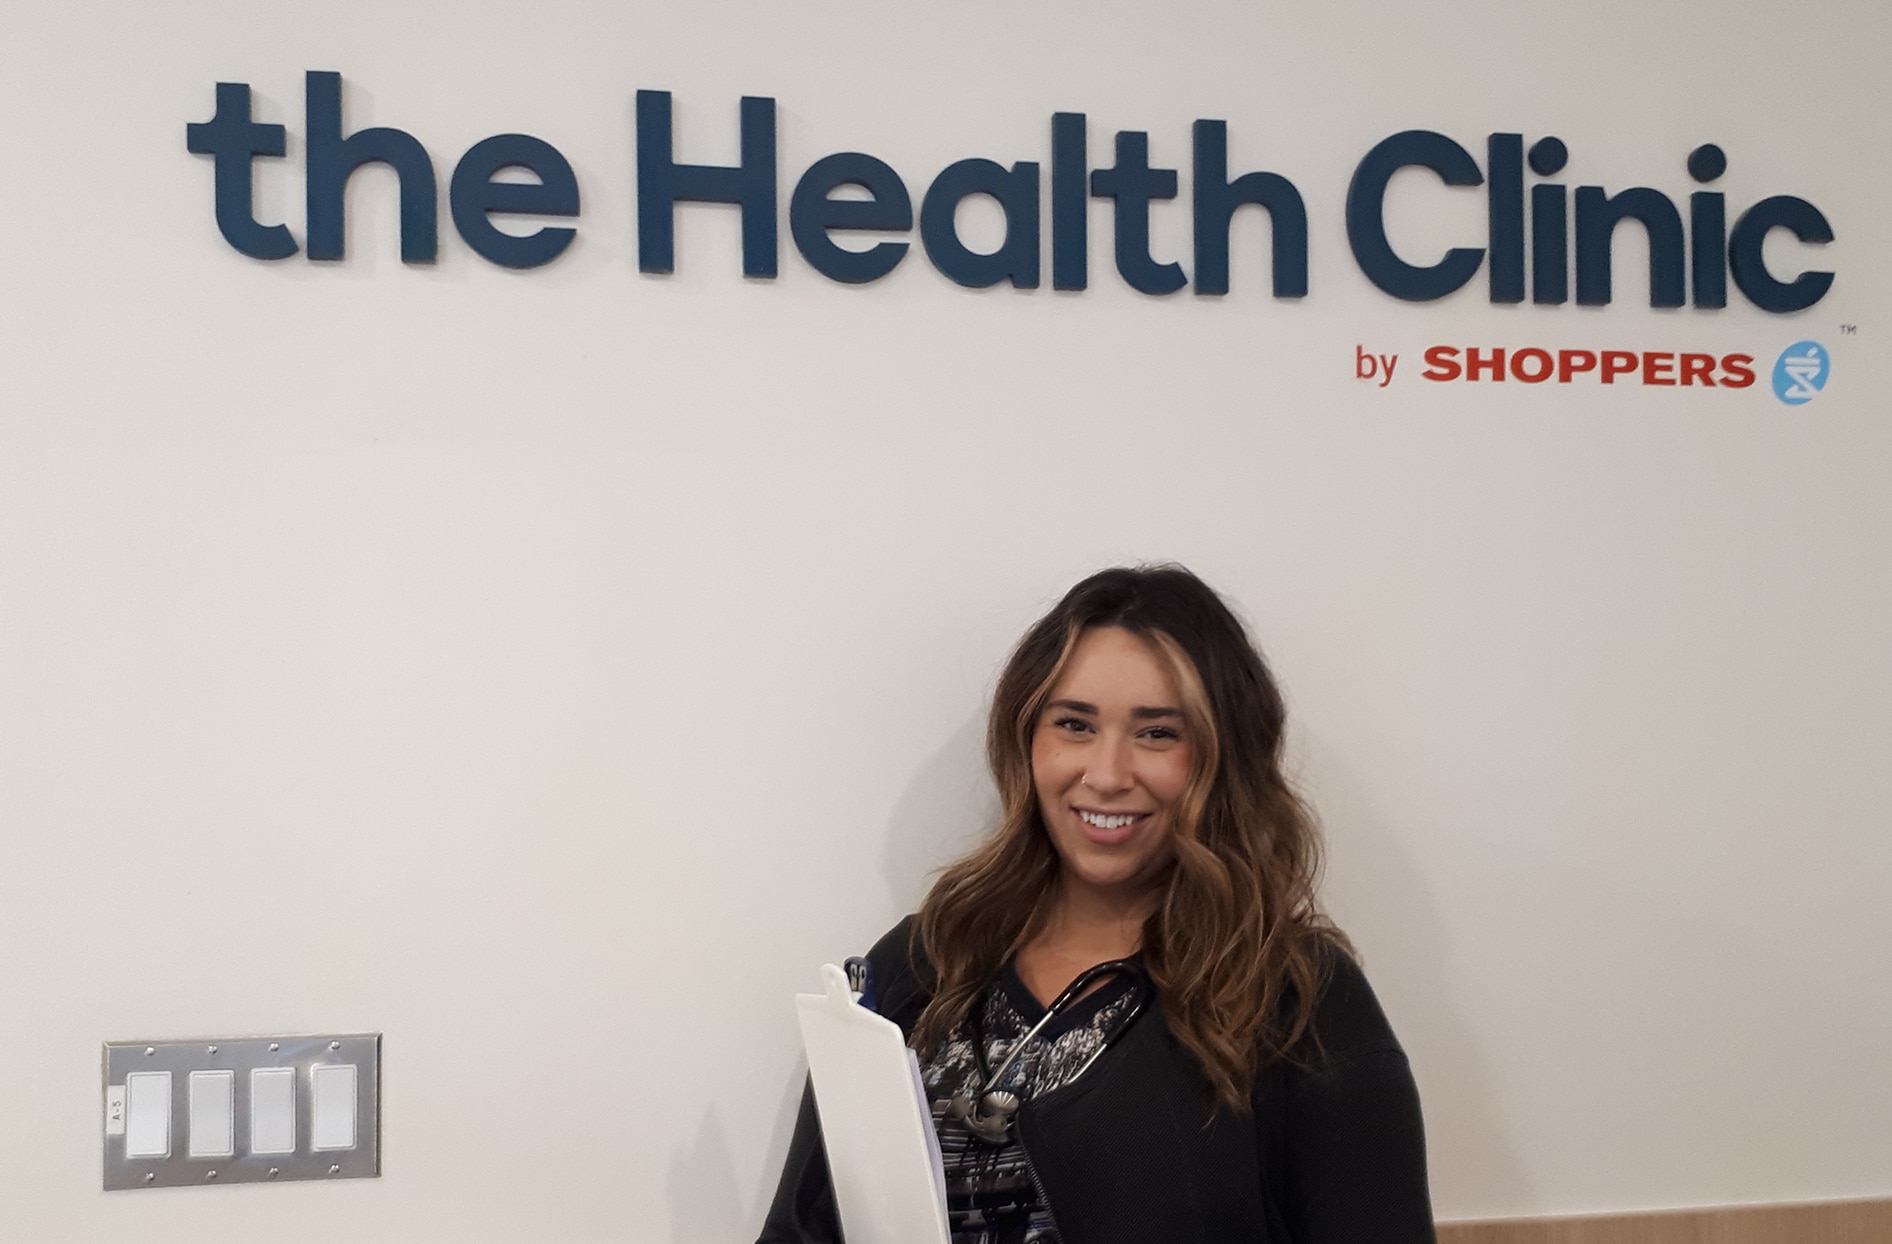 Rebekah stands in front of a “The Health Clinic by Shoppers” sign. 